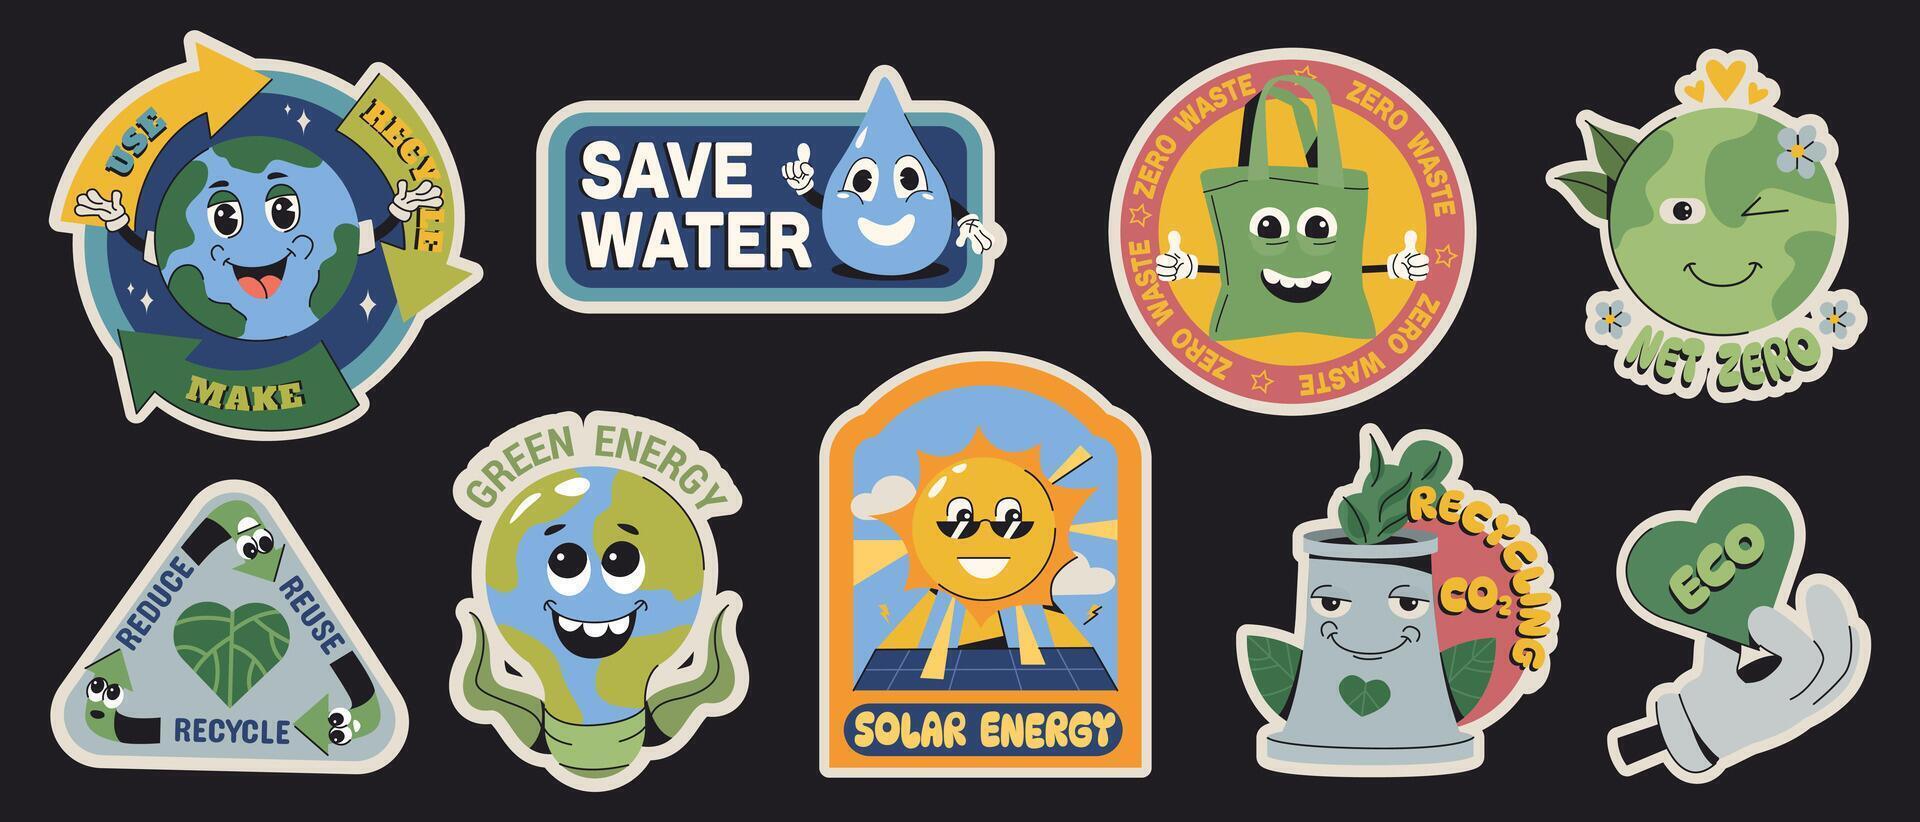 Groovy y2k retro cartoon ecology stickers. Funny earth characters with faces. Eco friendly badge or label on black background. Environmental protection. Save green planet, zero waste, recycle concept vector